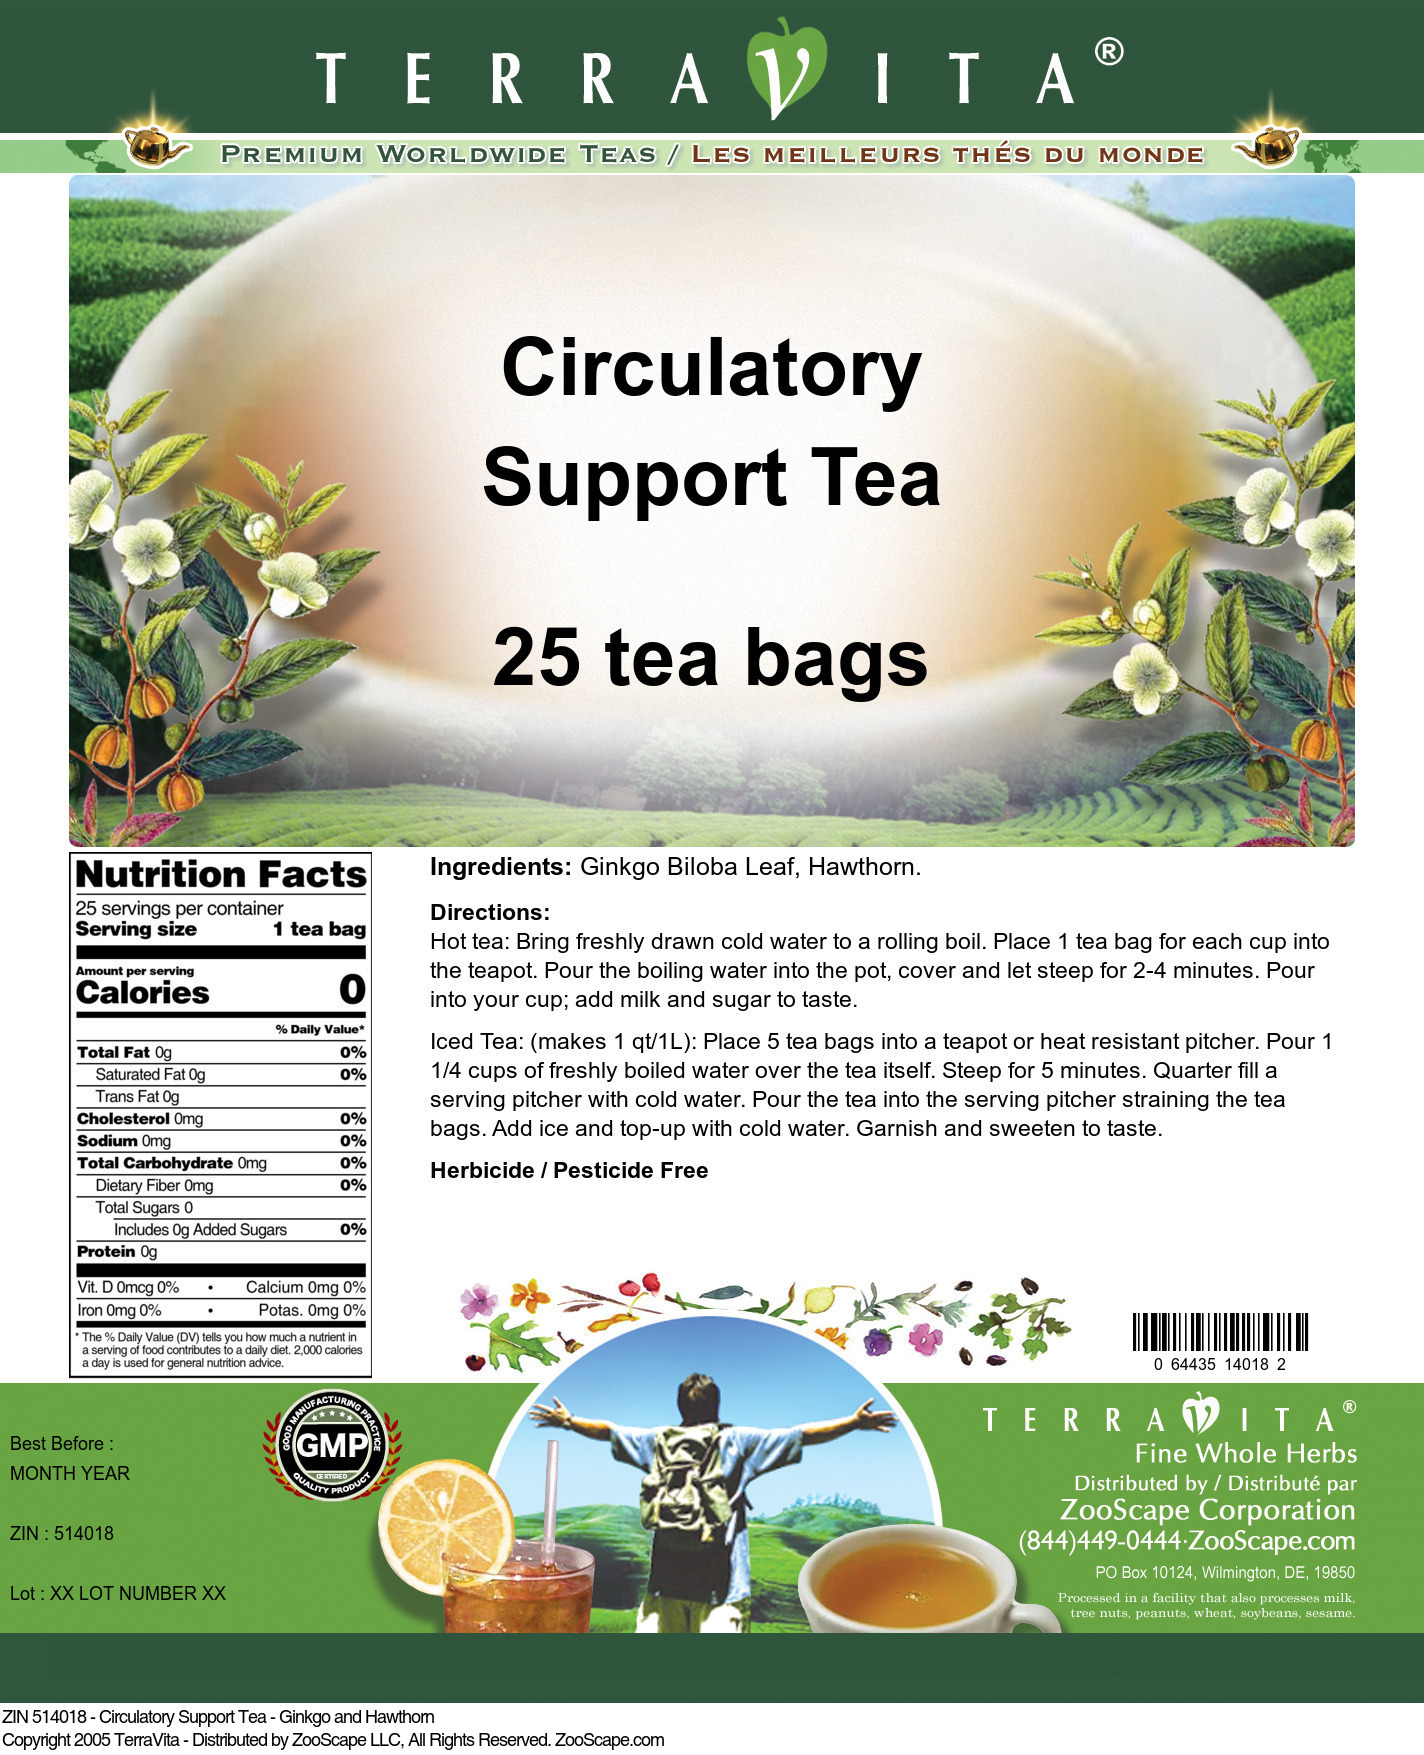 Circulatory Support Tea - Ginkgo and Hawthorn - Label